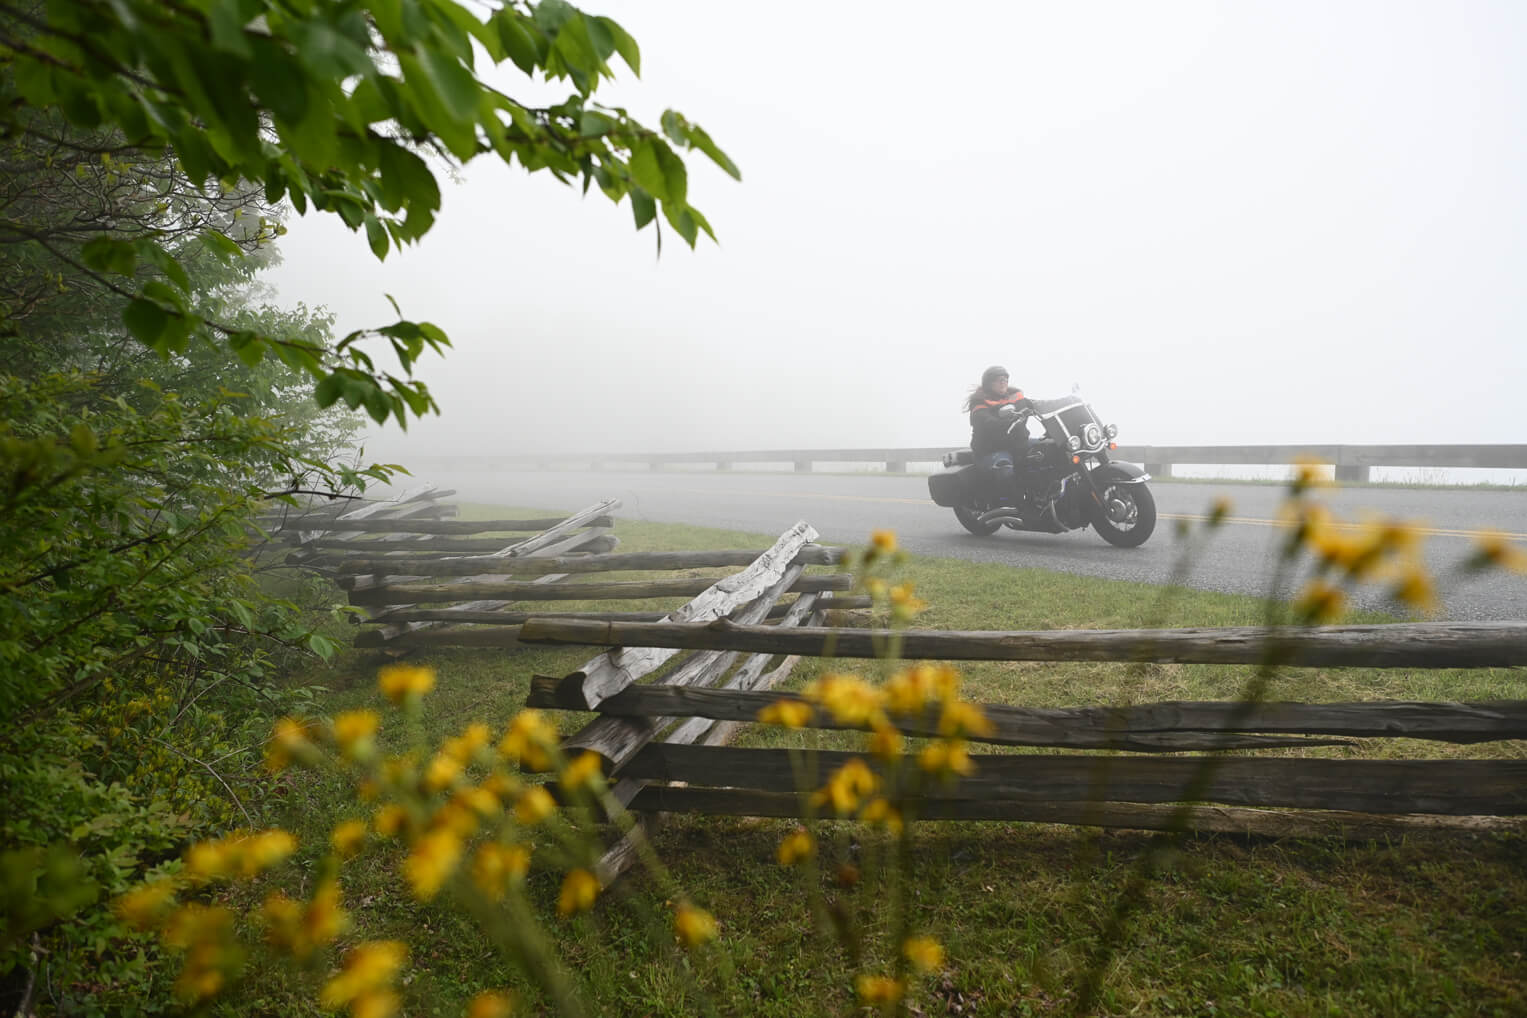 The rider experienced the western North Carolina mountains in the beauty of its light fog.